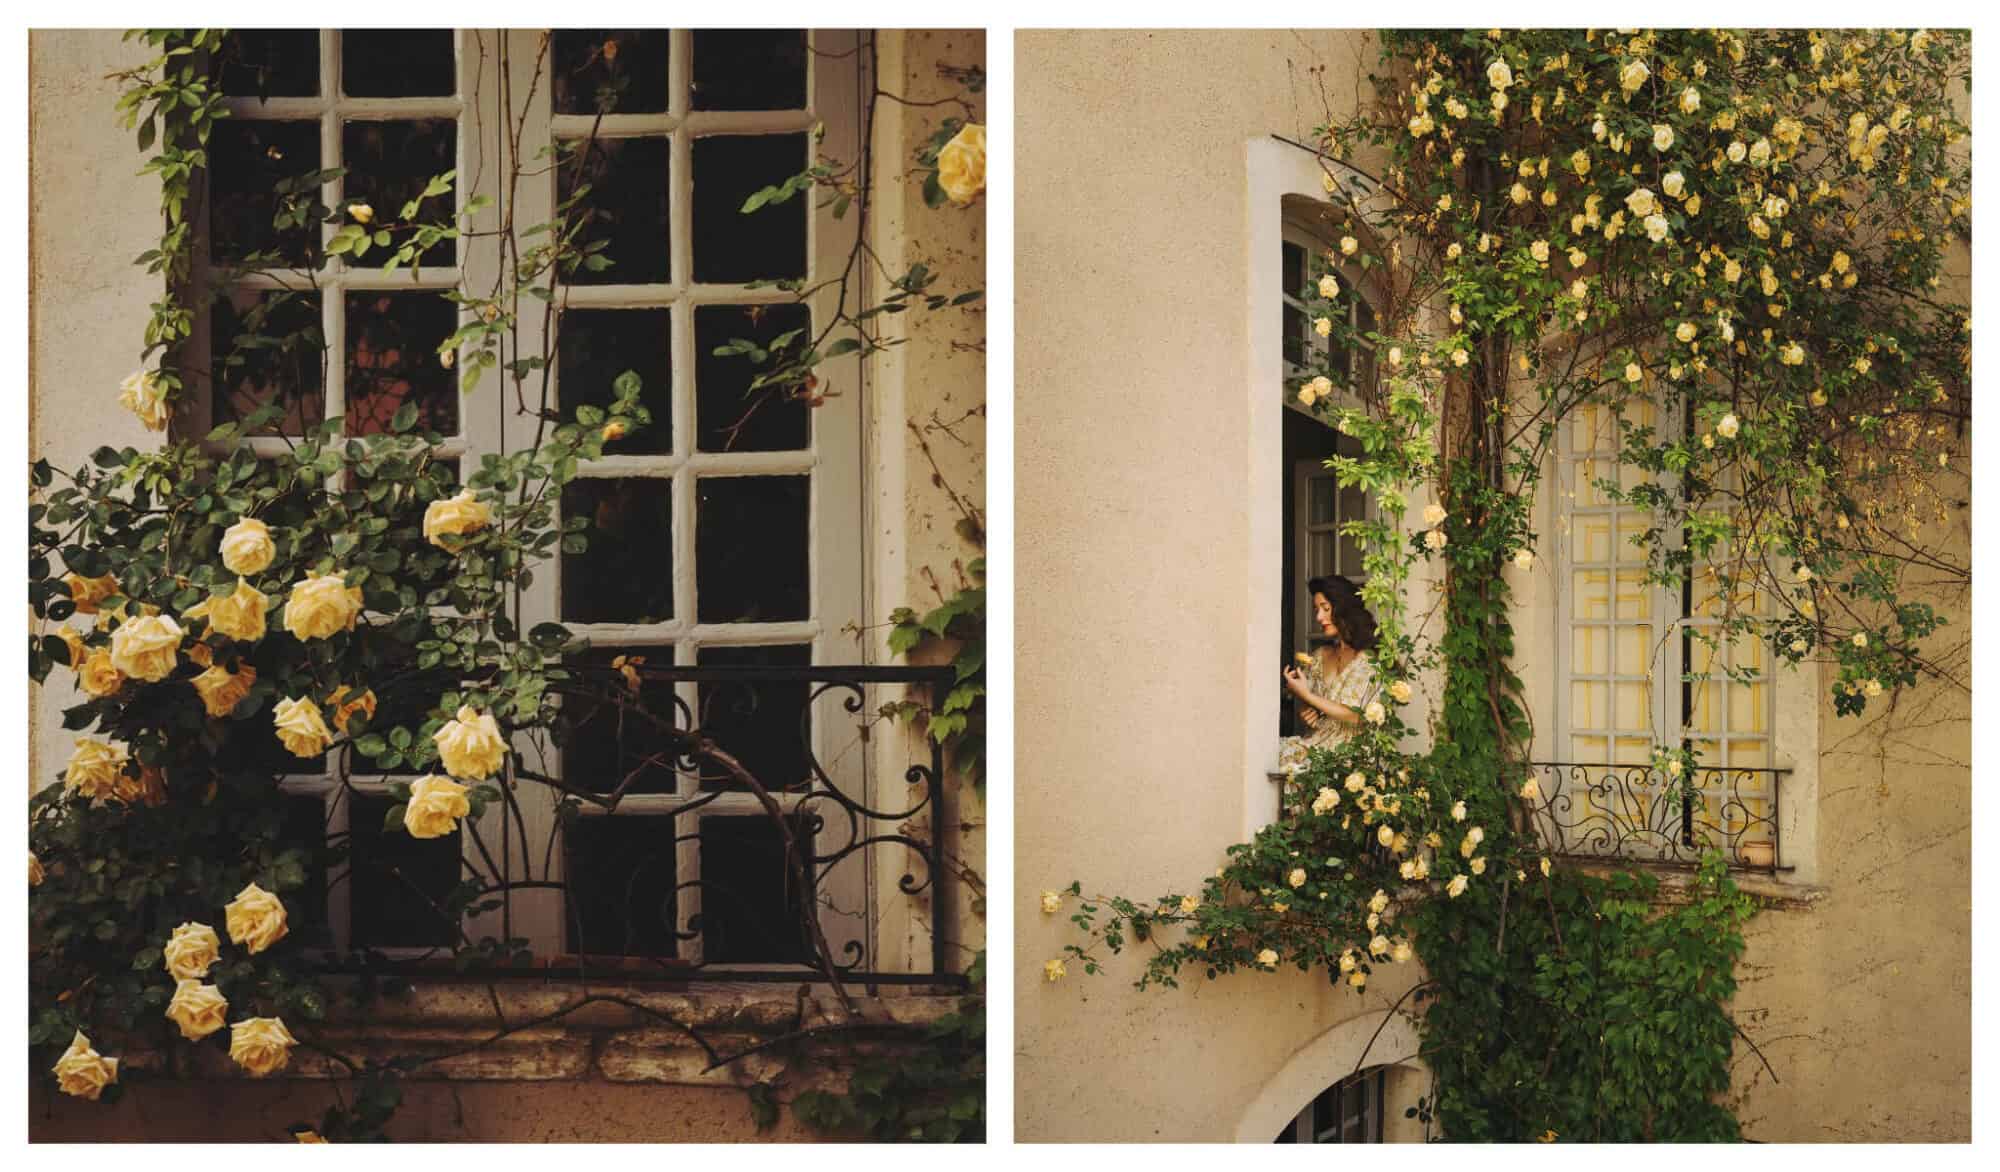 Left: a window in Provence with yellow roses growing all over it. Right: Jamie Beck self-portrait, she is seated on a window sill with yellow roses all around her